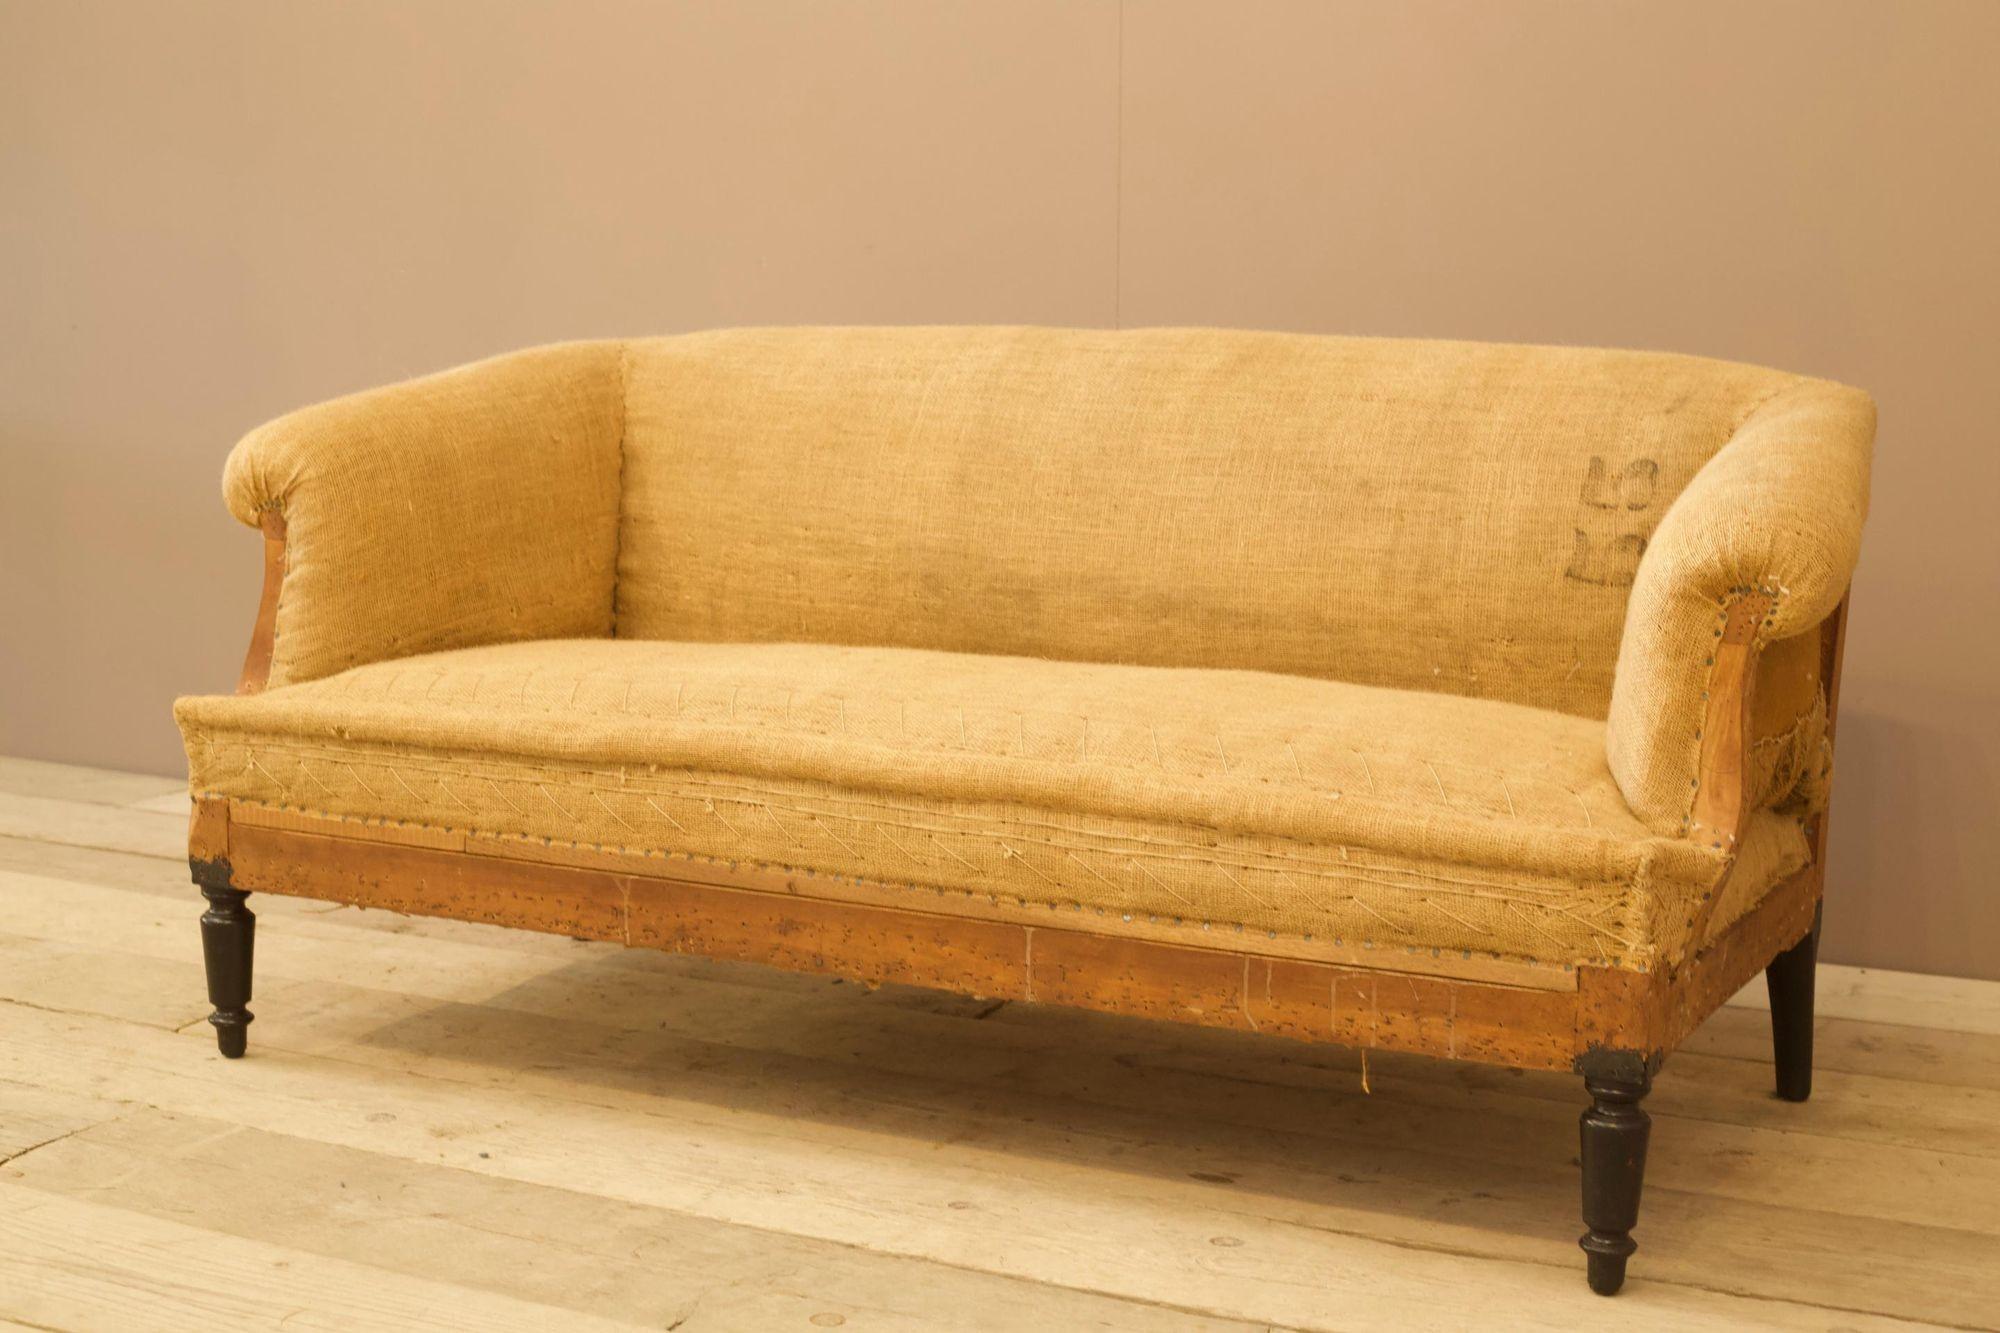 This is a superb quality Napoleon III square sided sofa. The design is very stylish and would sit well in any interior. It really is an ageless piece. Attractive smaller than average size but still comfortable and useable everyday.
Measurements